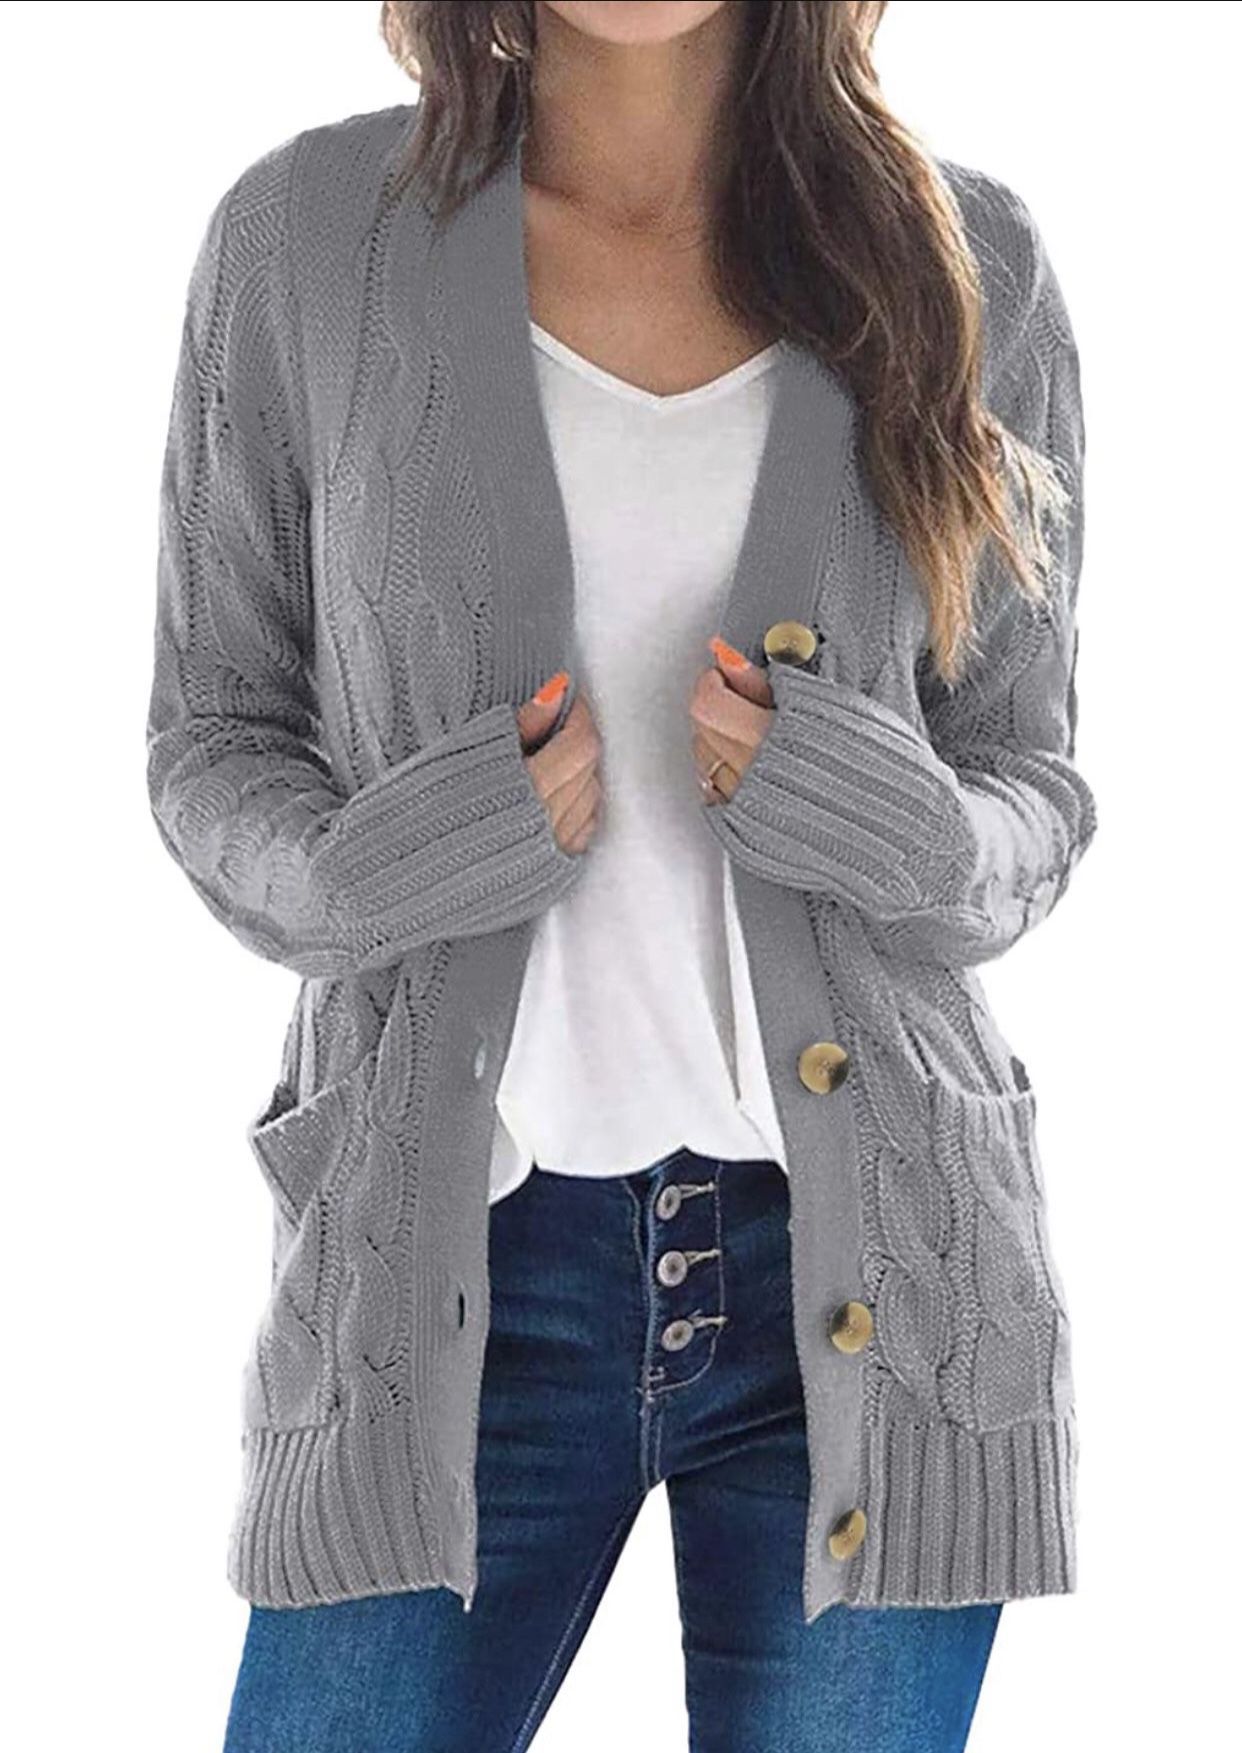 Women's Cable Knit Cardigan Button Down Open Front Casual Sweater Coat (size small)